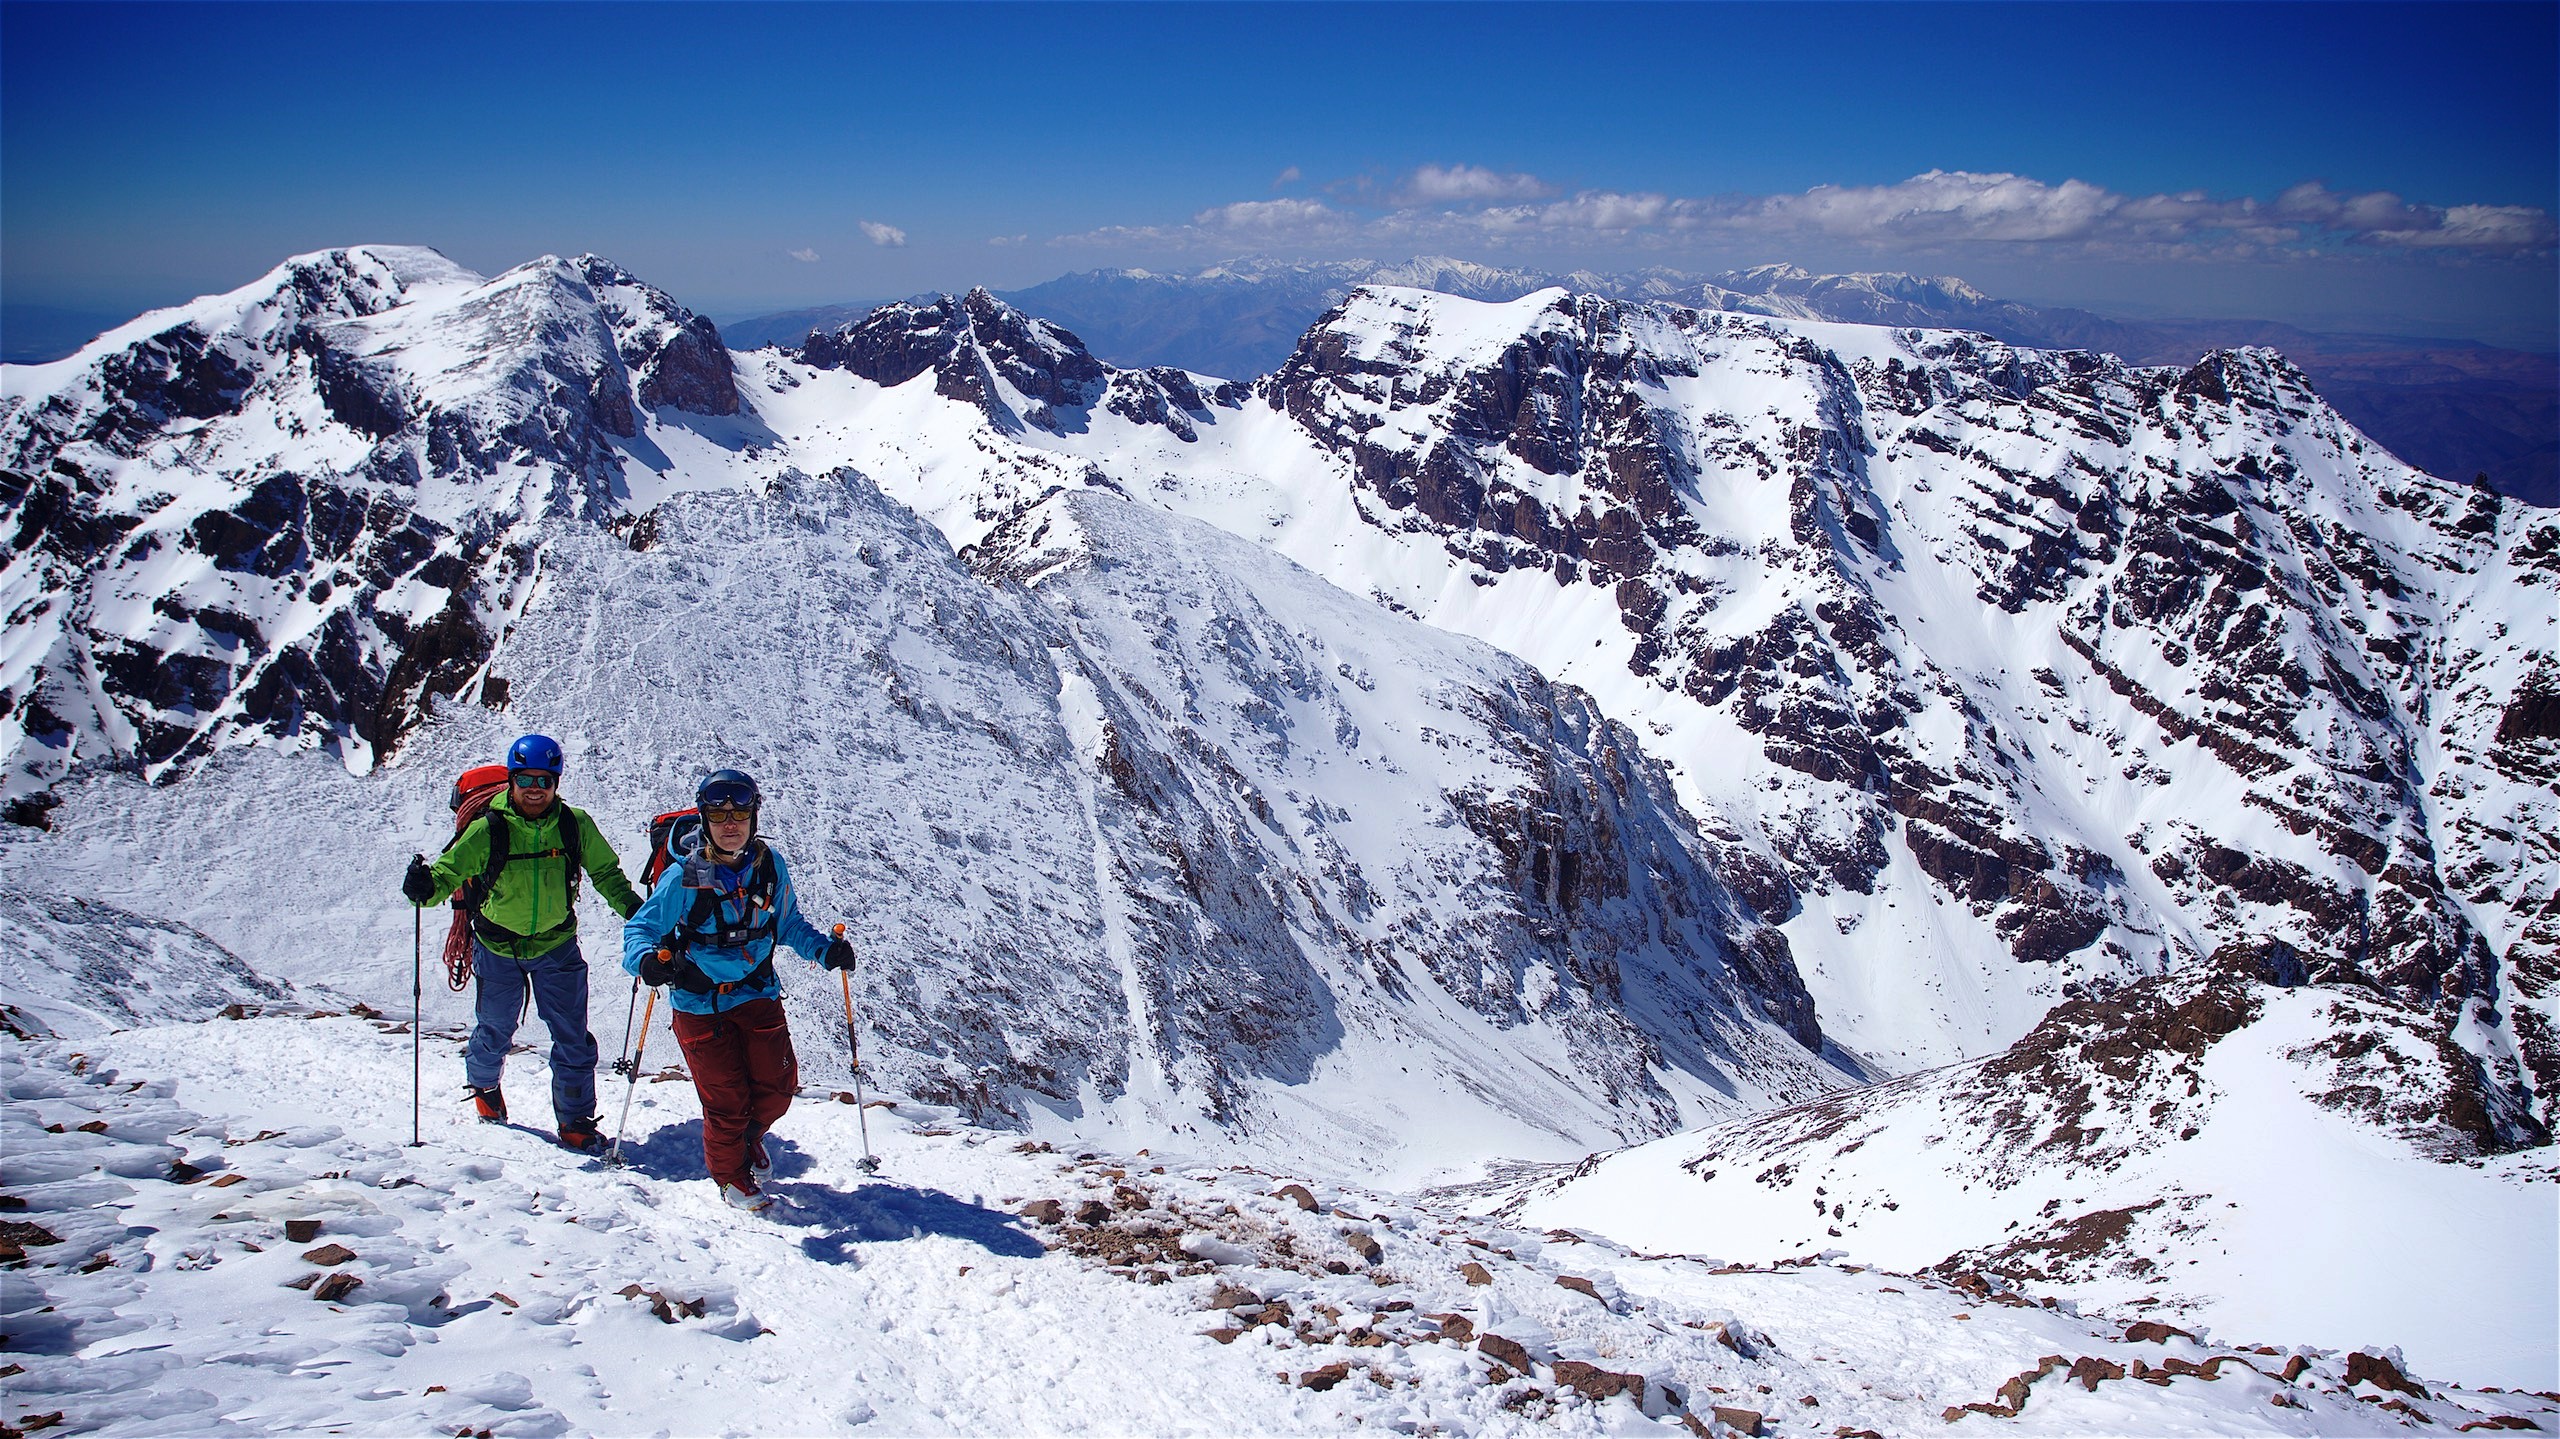 08 days hiking tour to the Atlas Mountains from Marrakesh in Morocco